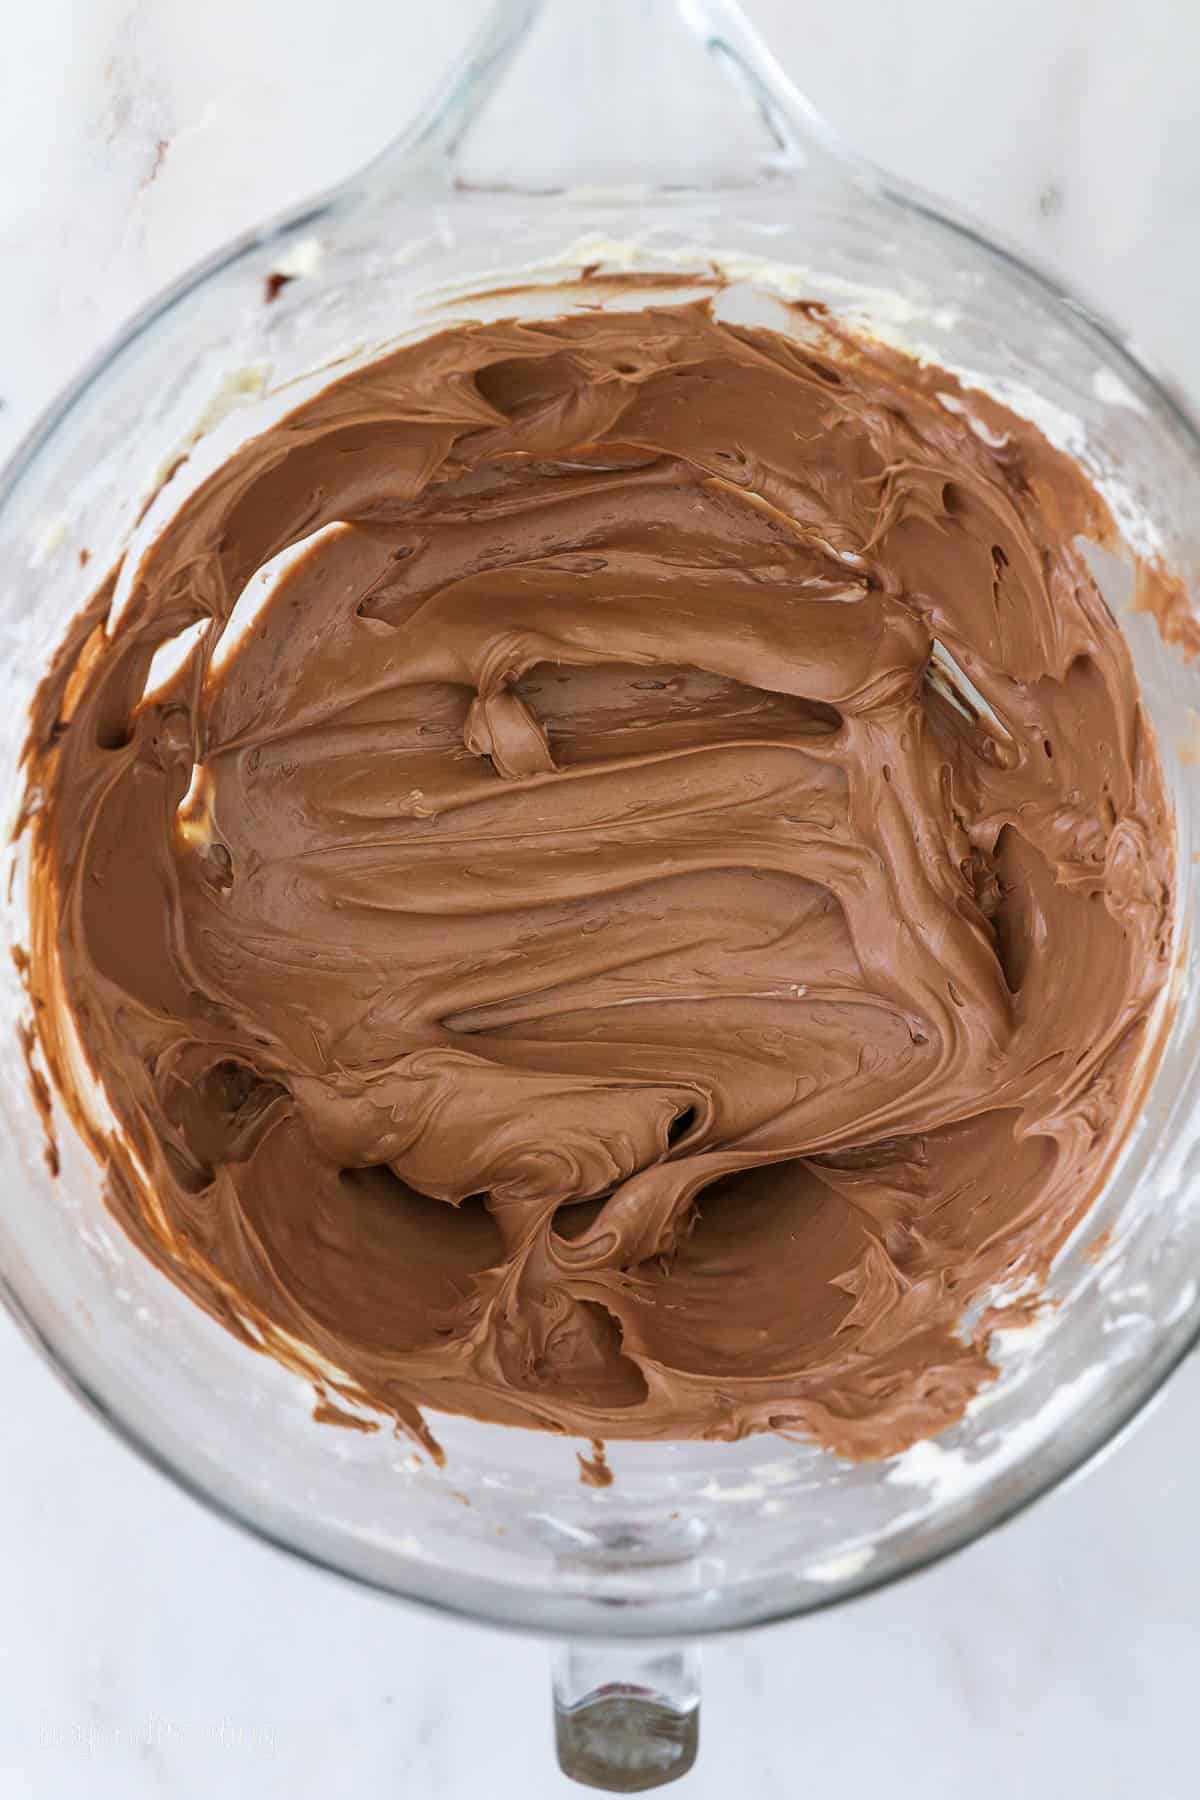 Nutella buttercream frosting in a glass bowl.